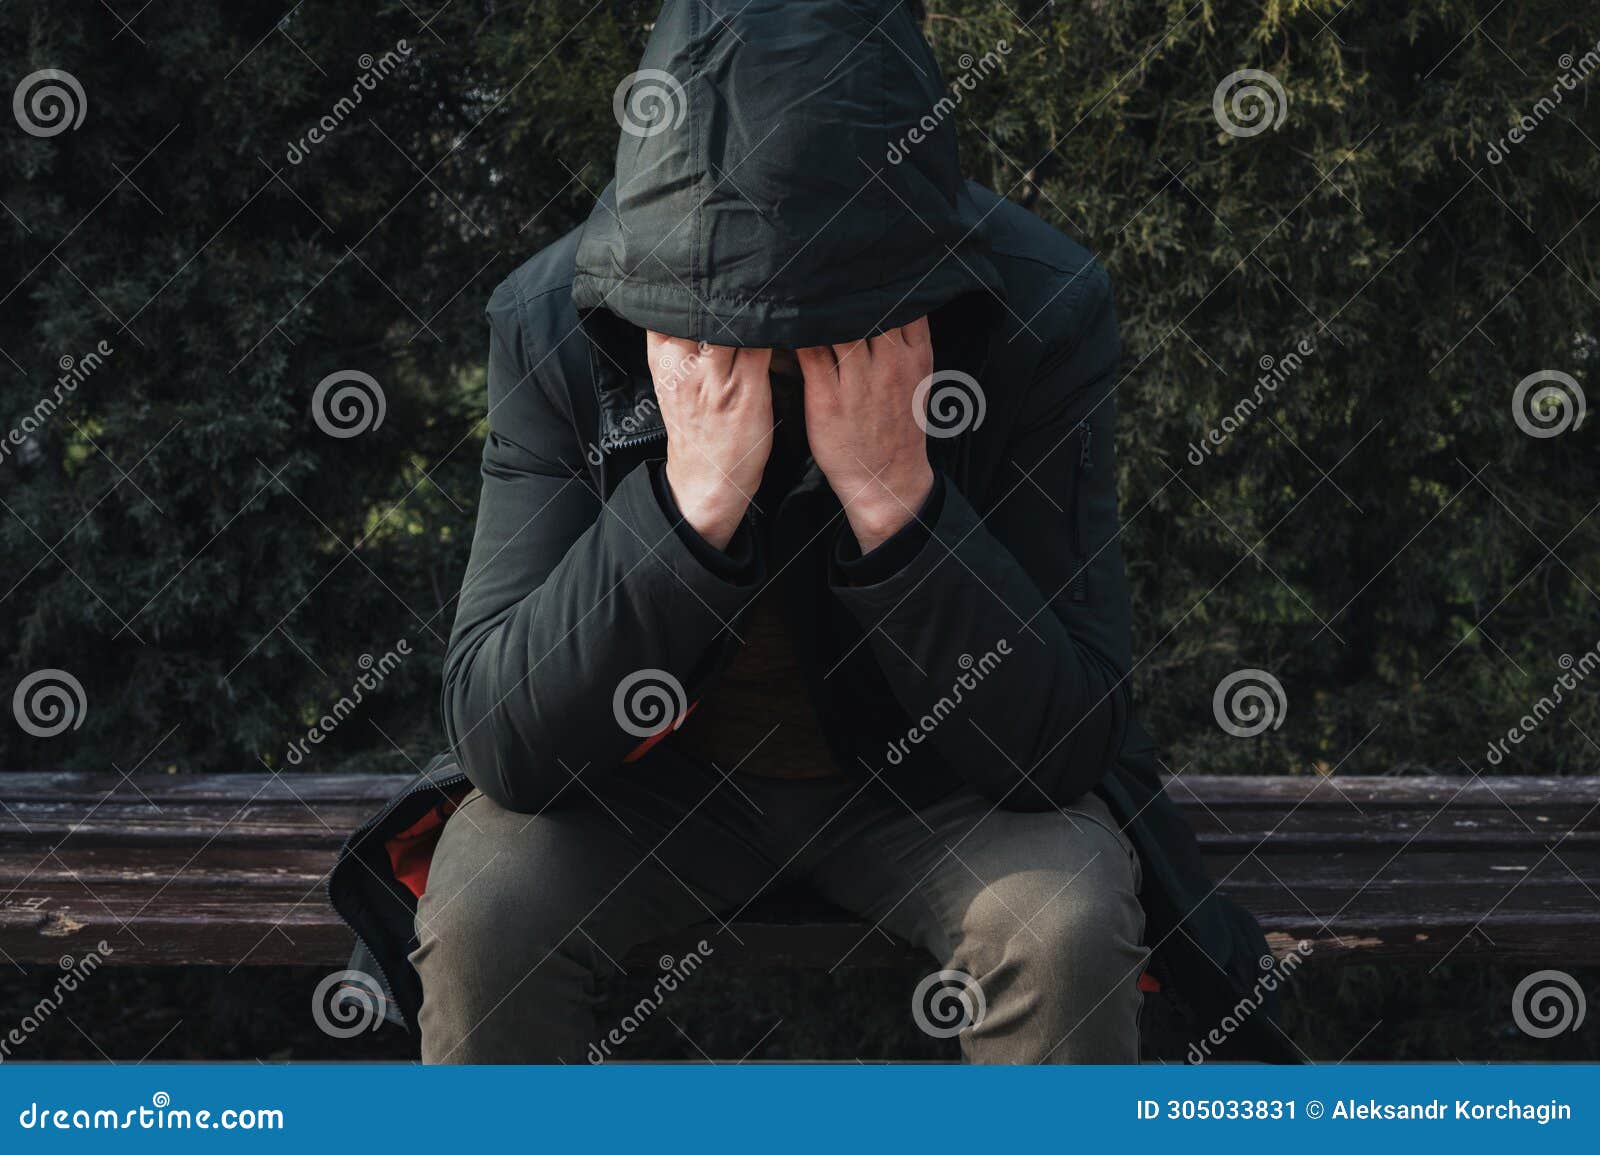 Sad Lonely Man Homeless Depressed and Upset Sits on Park Bench and ...